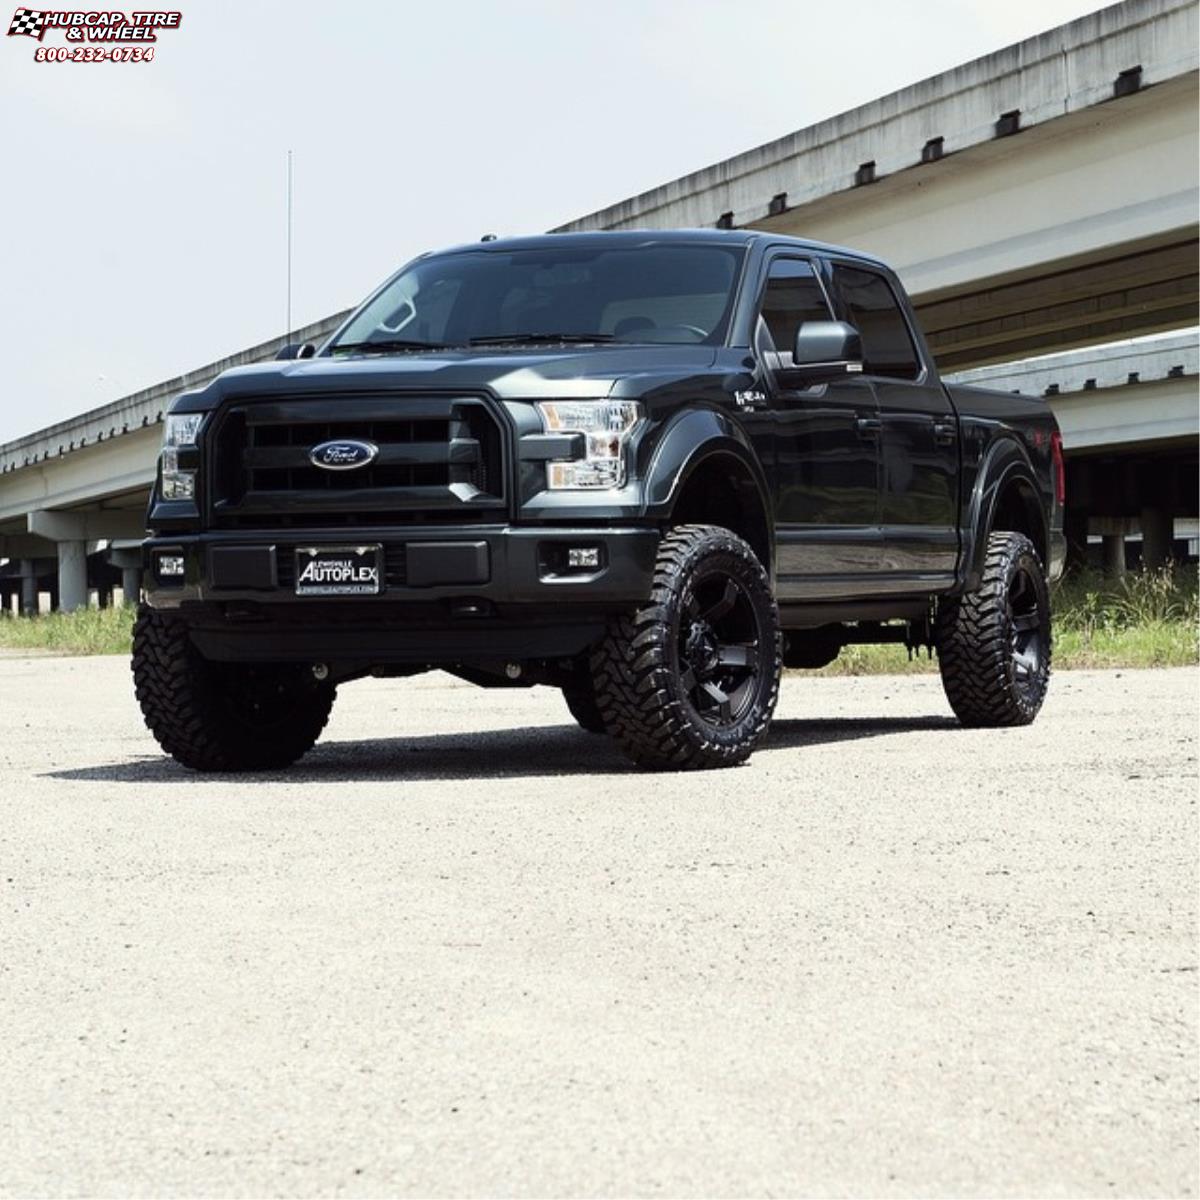 vehicle gallery/ford f 150 xd series xd811 rockstar 2  Satin Black and Black Inserts wheels and rims